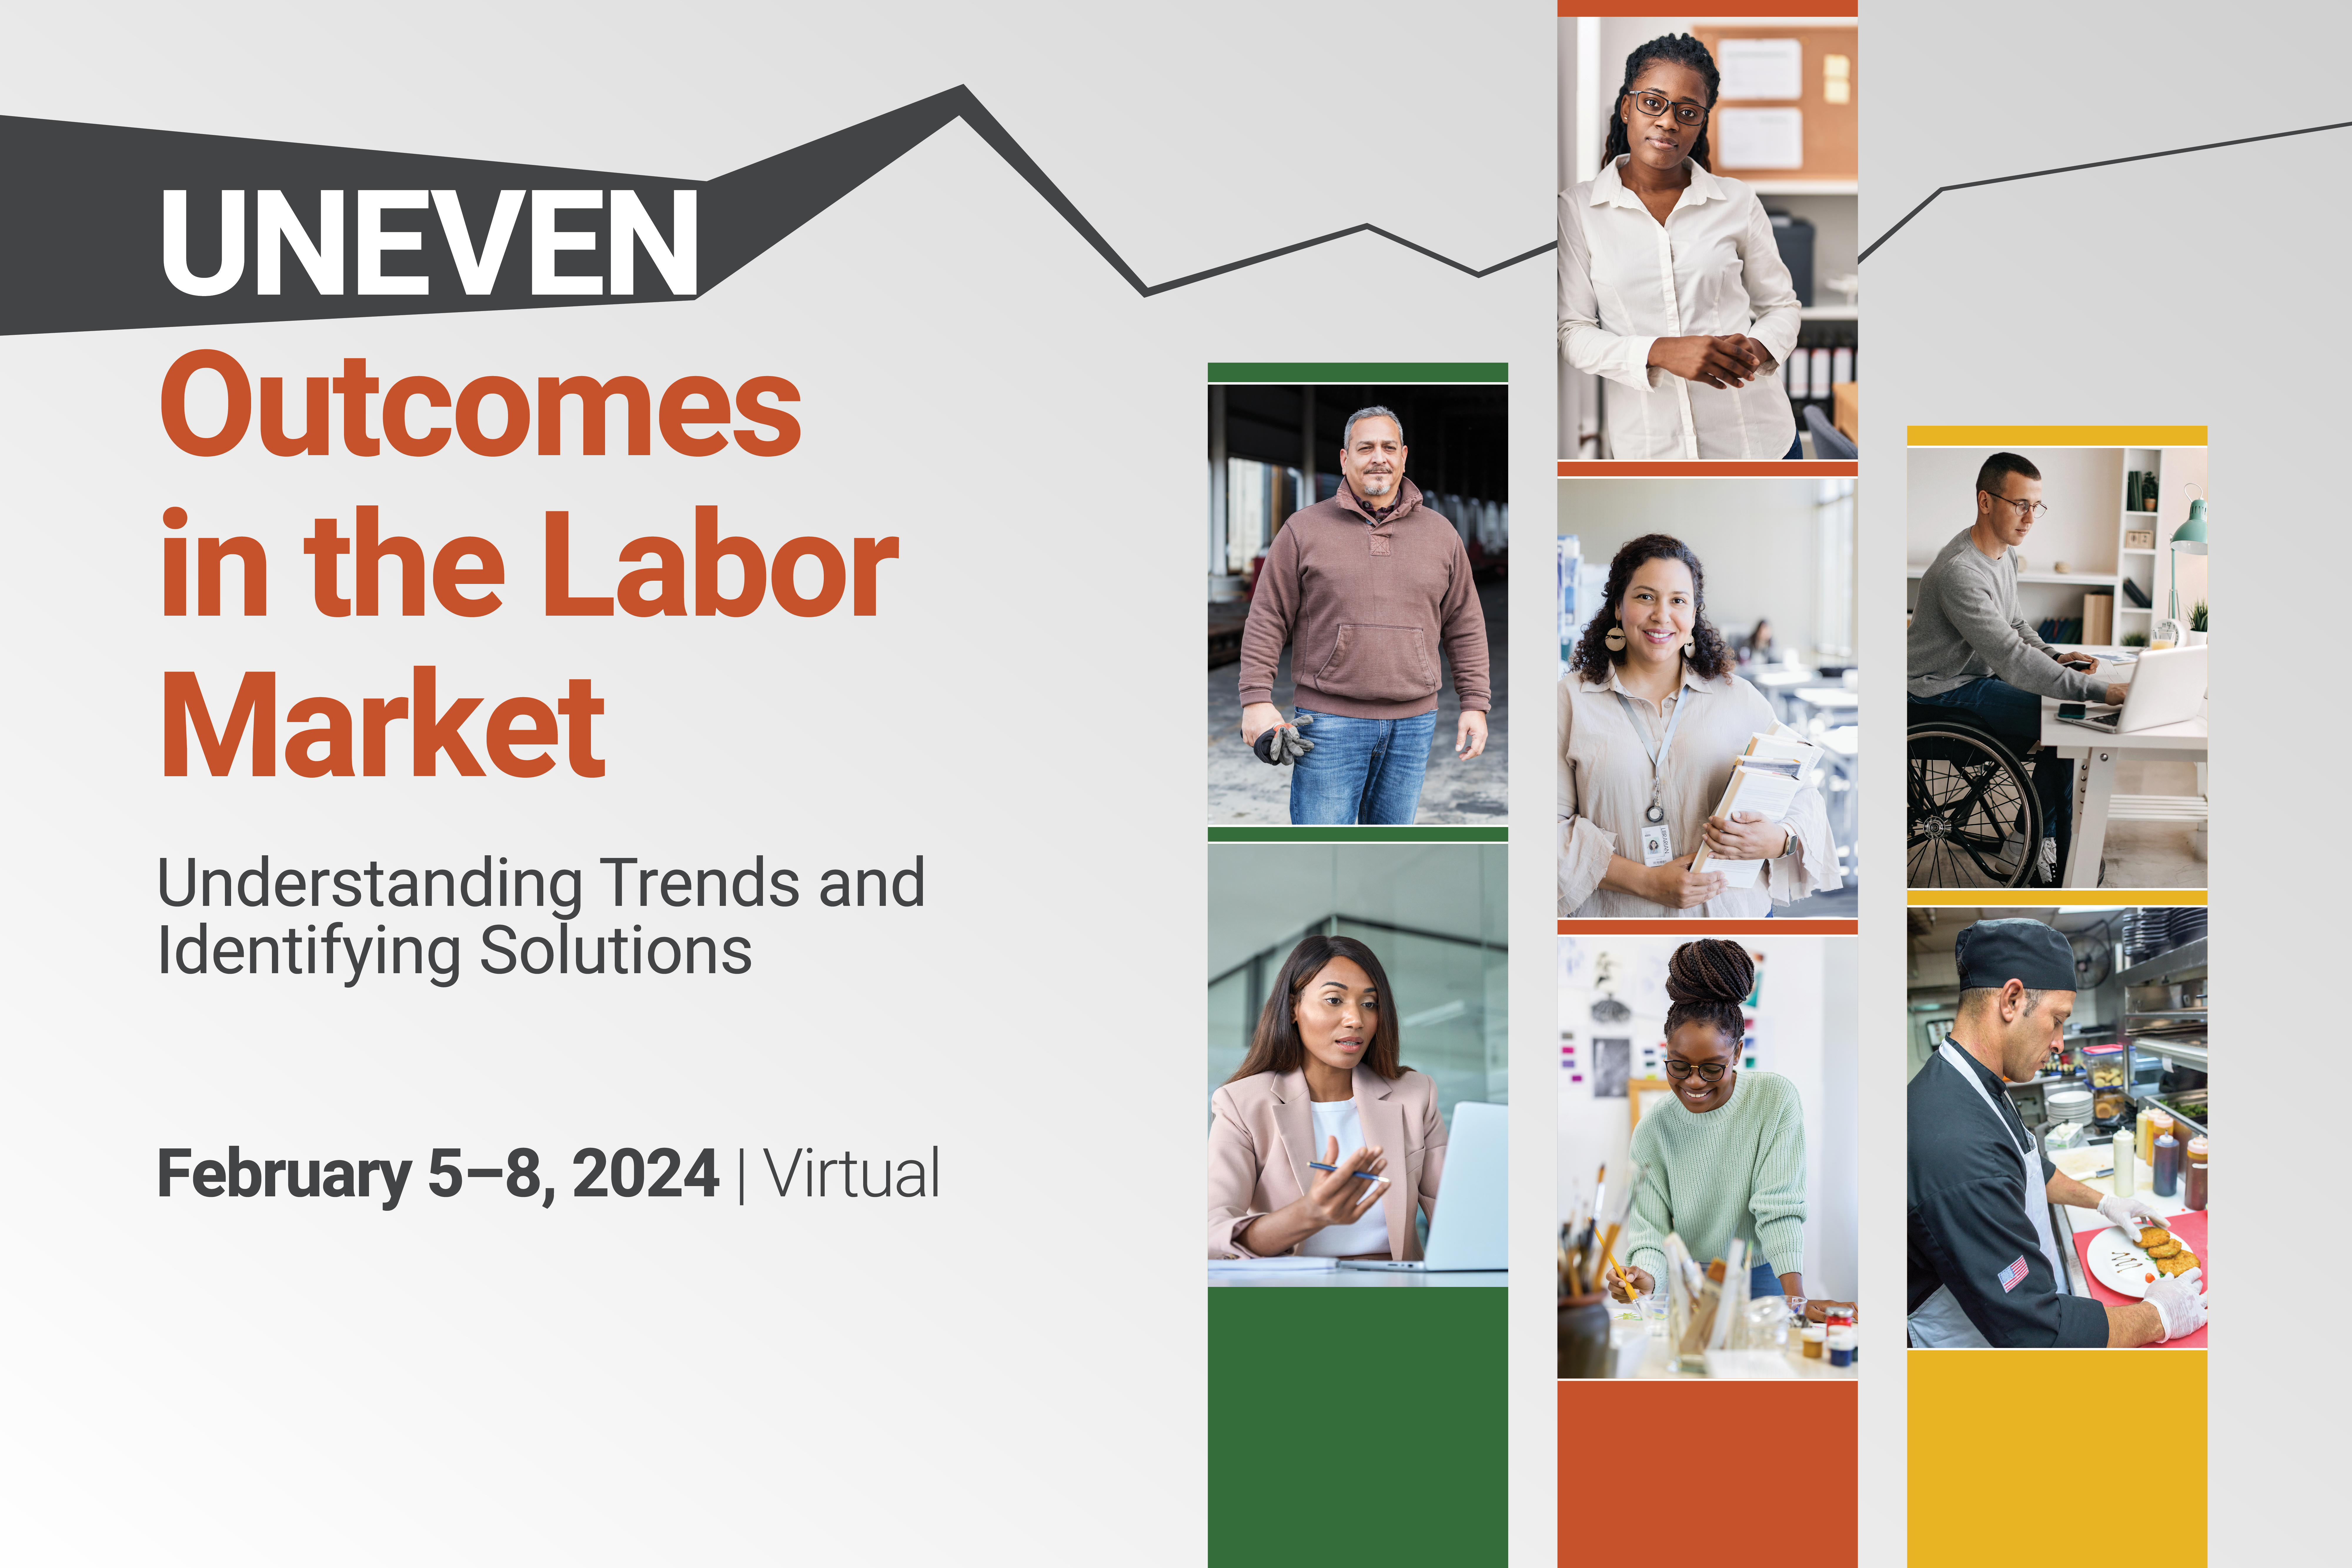 Uneven Outcomes in the Labor Market Conference 2024